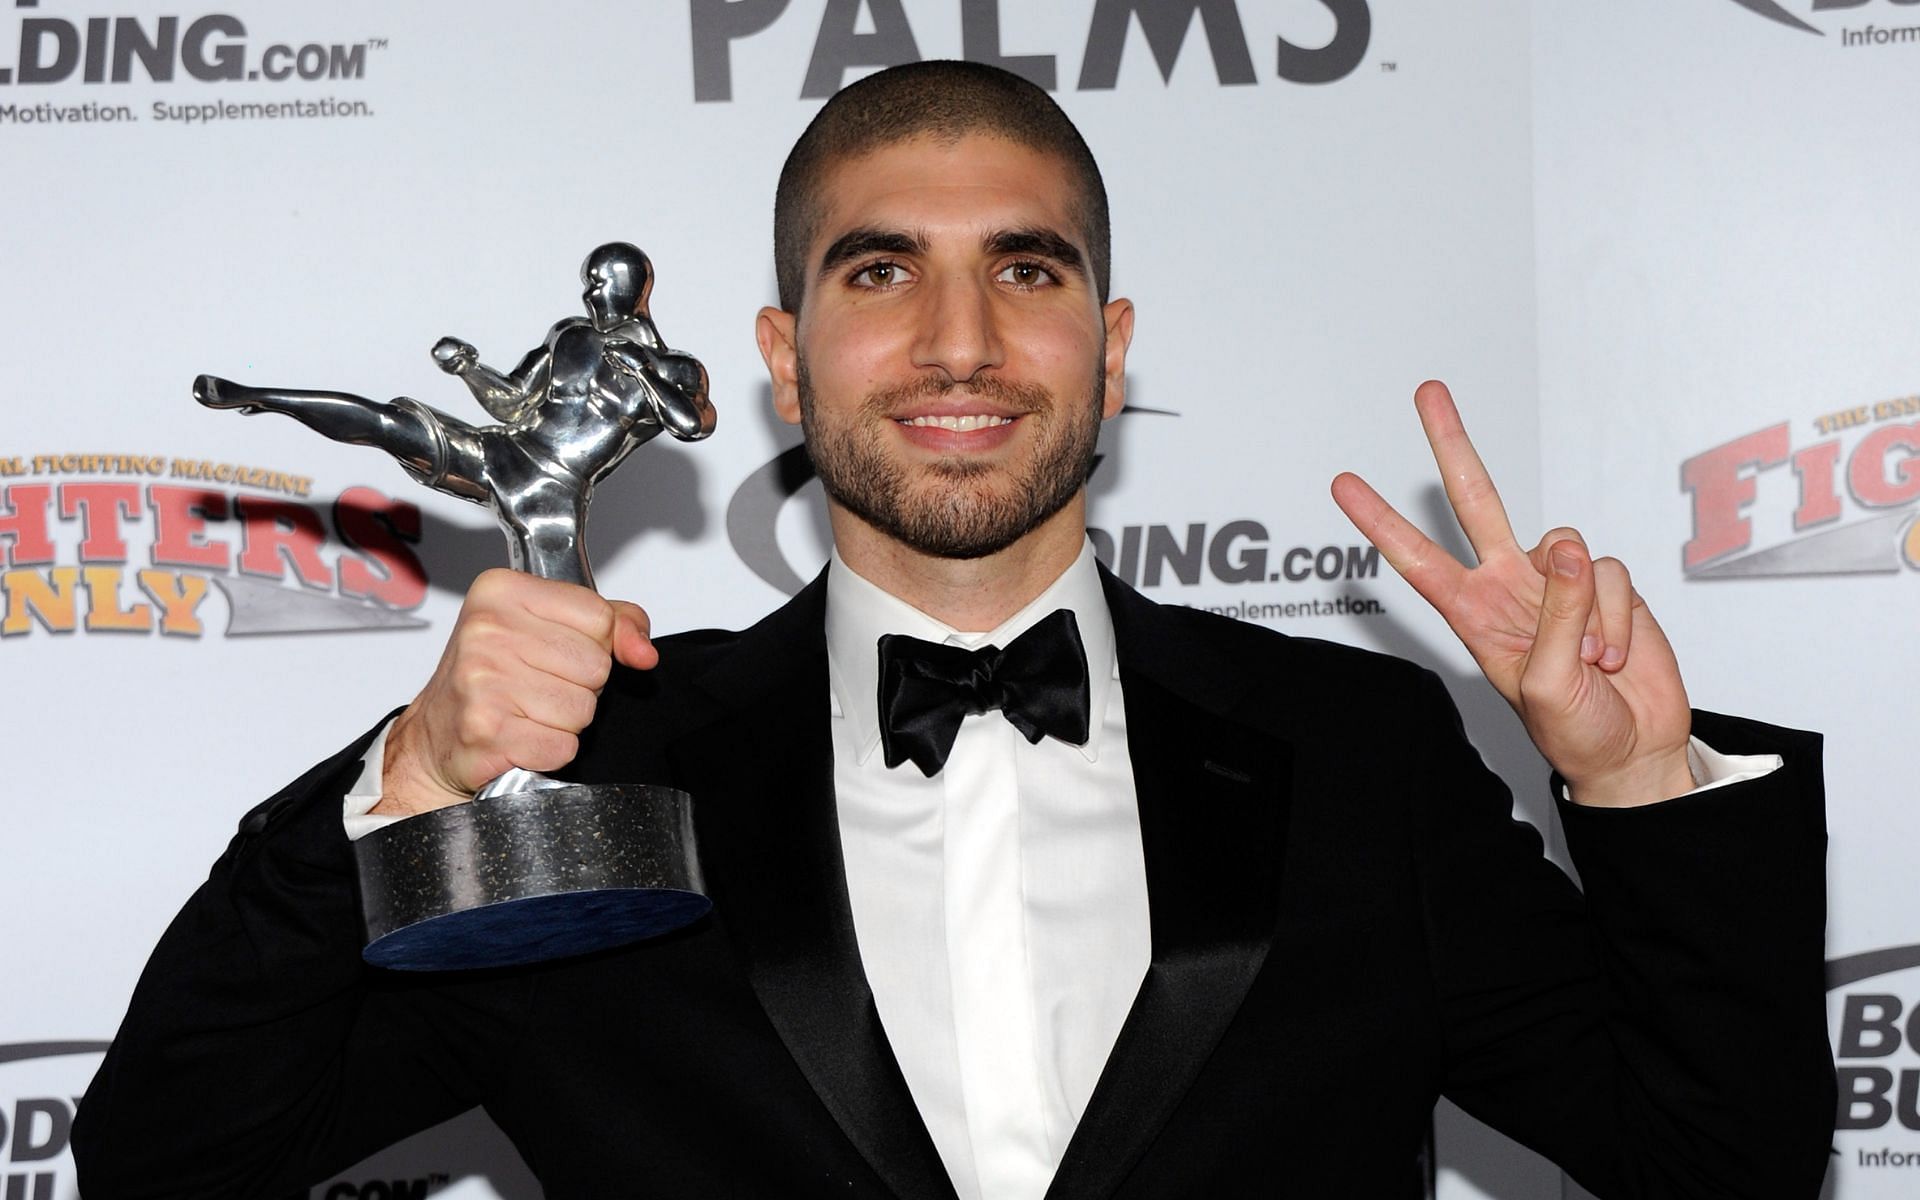 Fighters Only World Mixed Martial Arts Awards 2011, Ariel Helwani